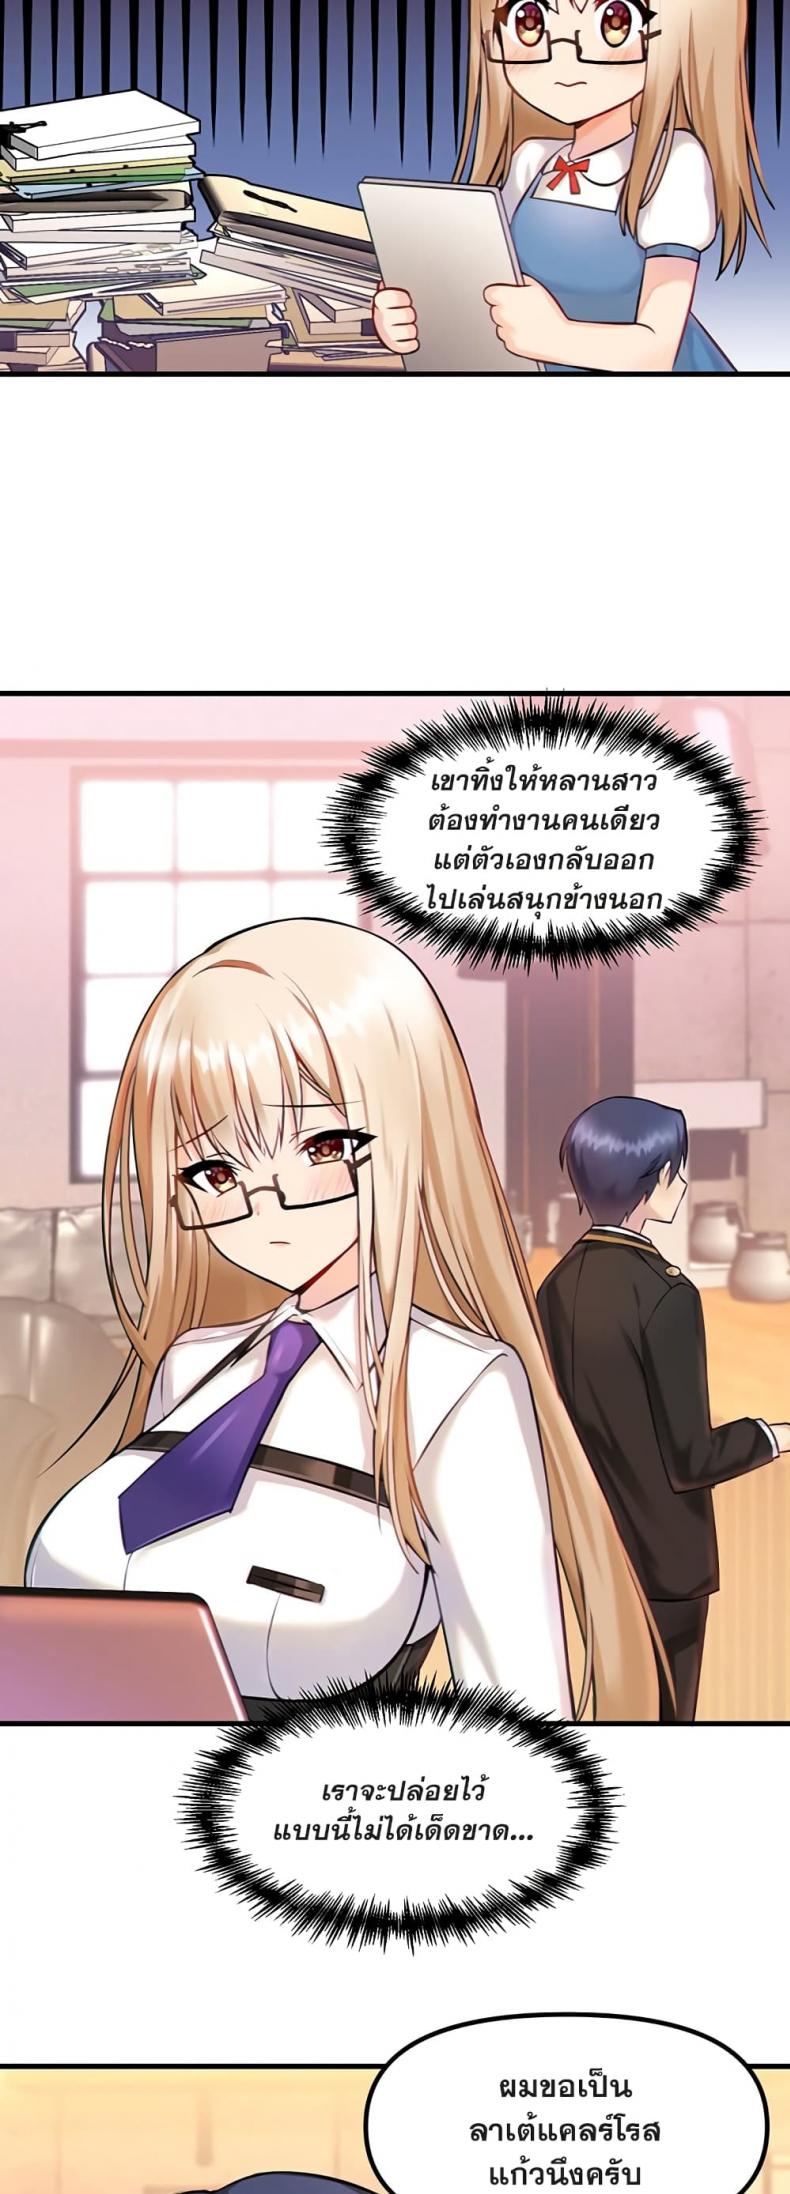 Trapped in the Academy’s Eroge 2 ภาพที่ 5